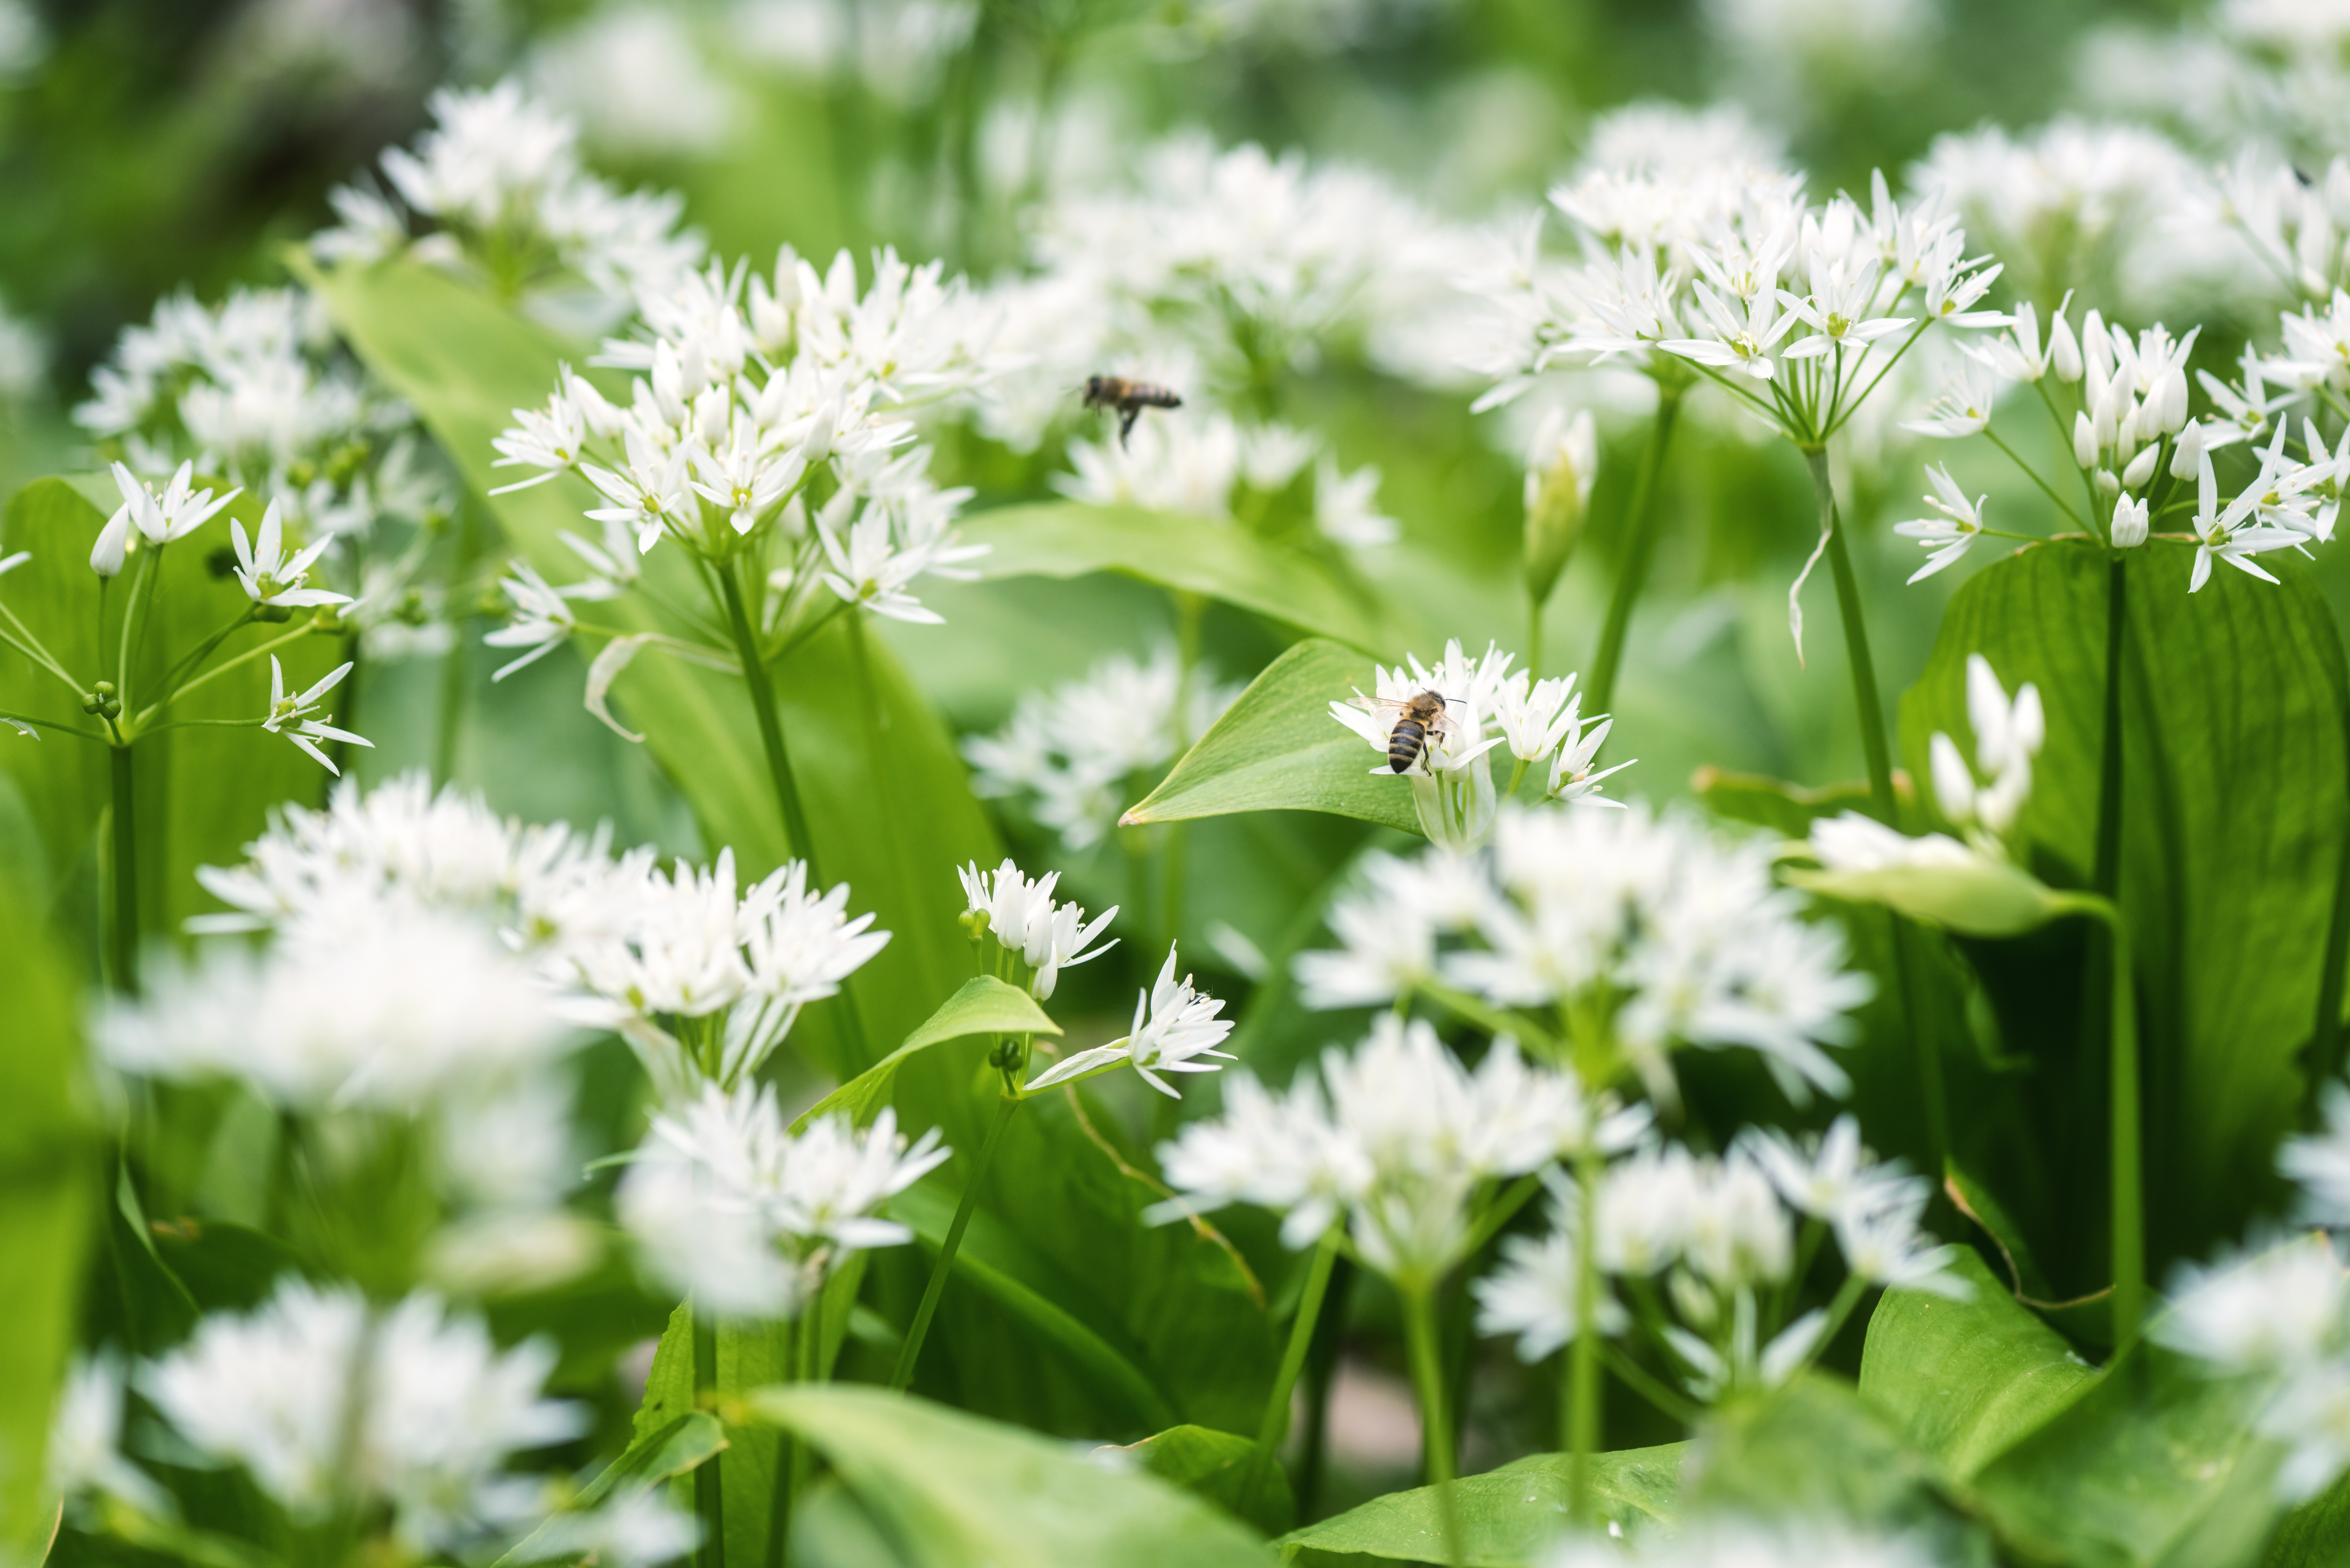 Bees resting on white wild garlic flowers surrounded by green leaves.